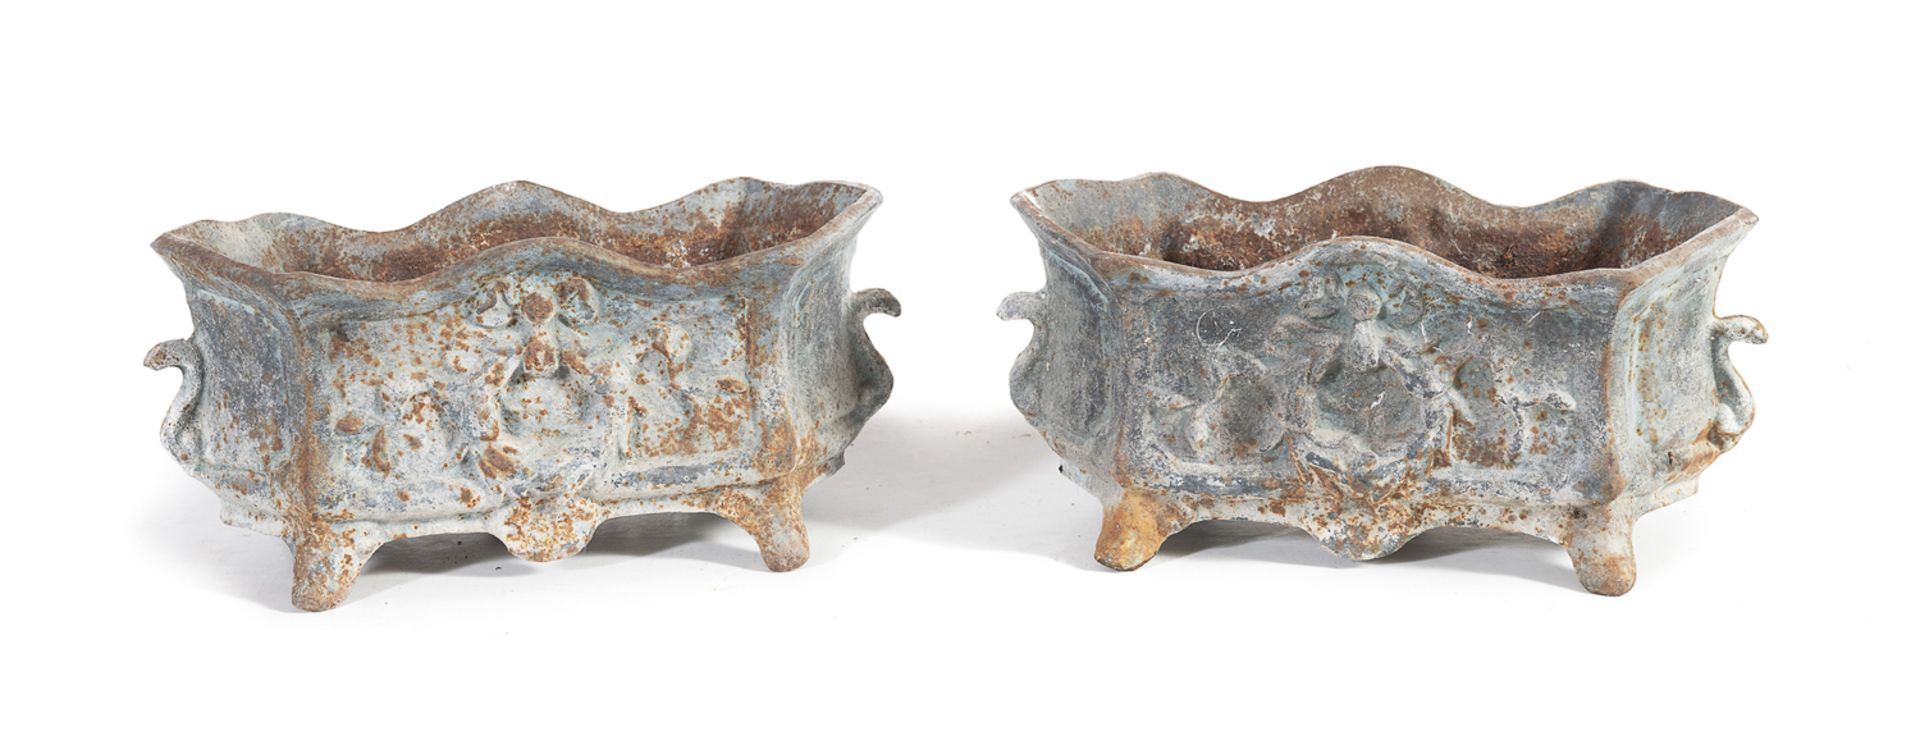 PAIR OF SMALL CAST IRON CACHEPOTS 19th CENTURY